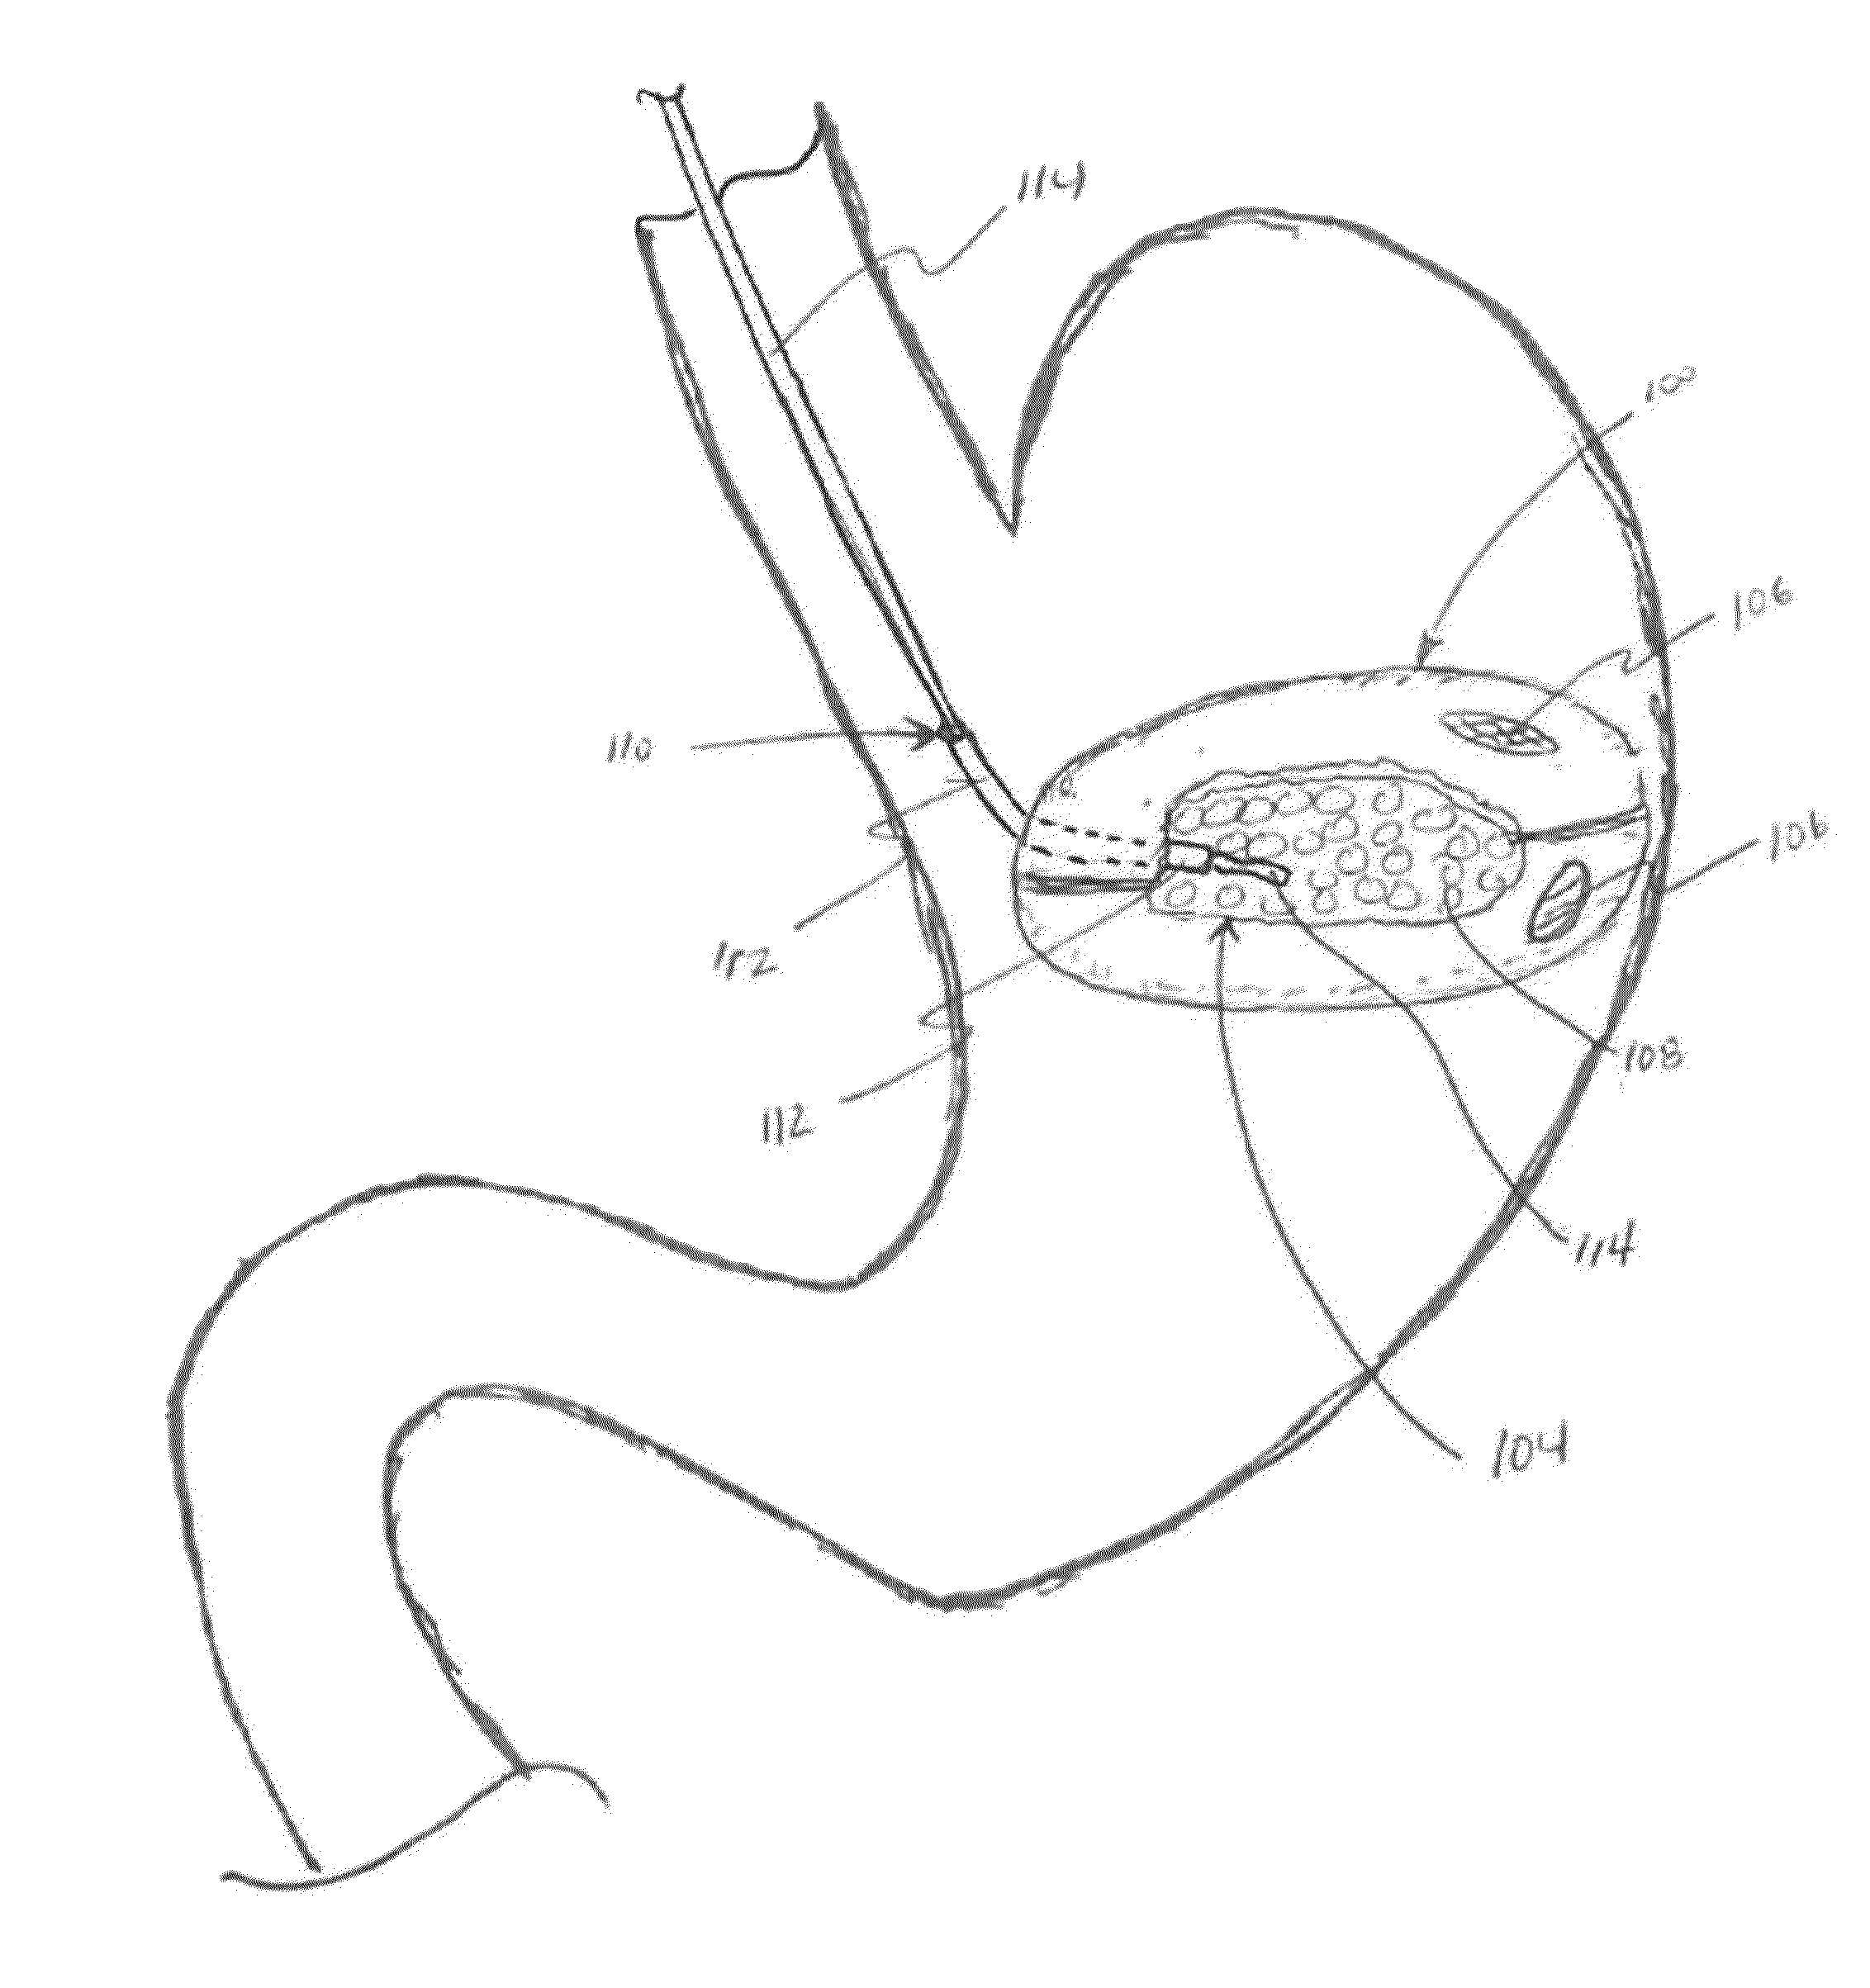 Methods and devices for deploying and releasing a temporary implant within the body